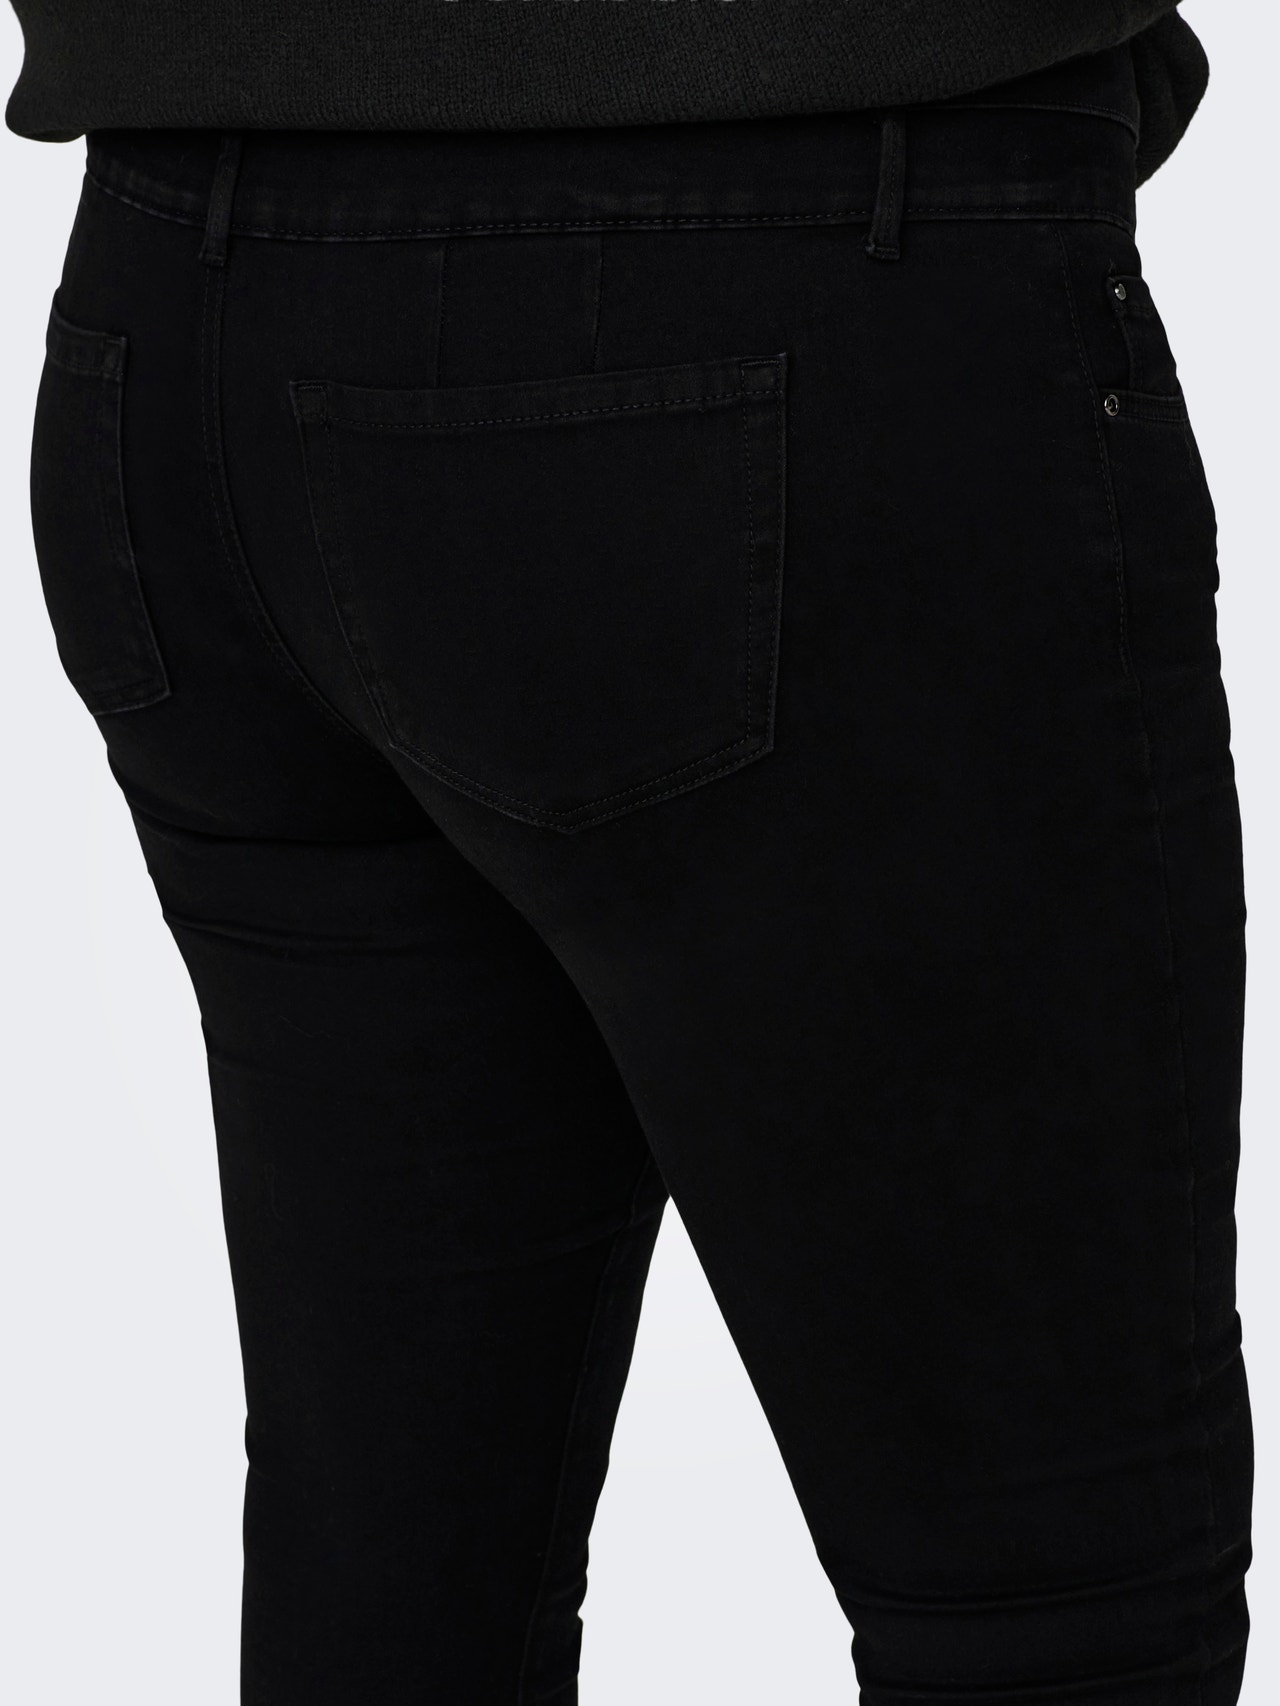 ONLY Jeans Skinny Fit -Black - 15300126